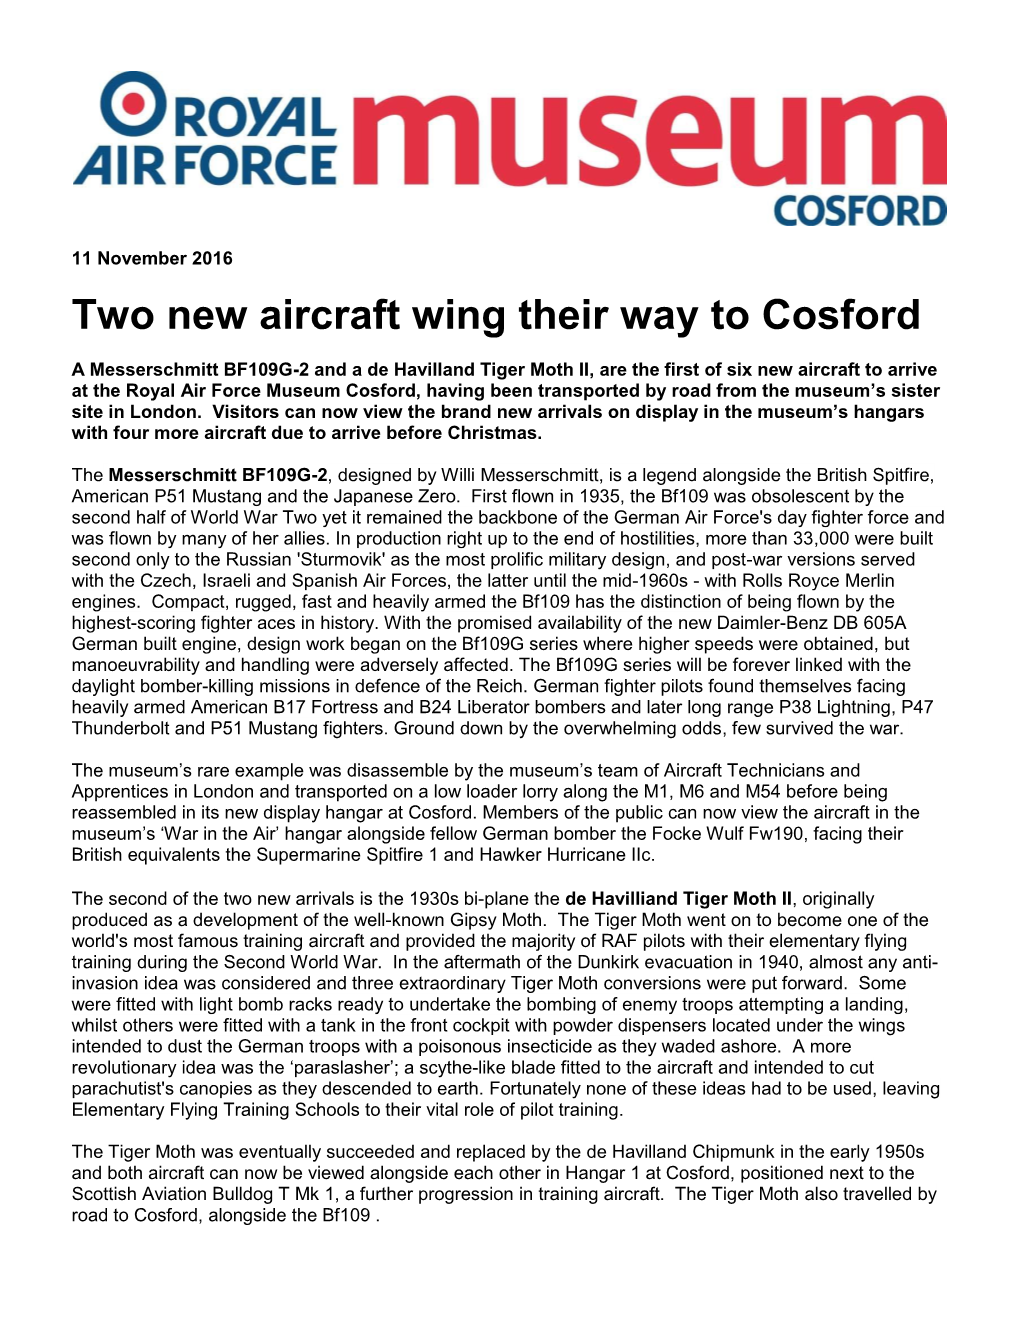 Two New Aircraft Wing Their Way to Cosford